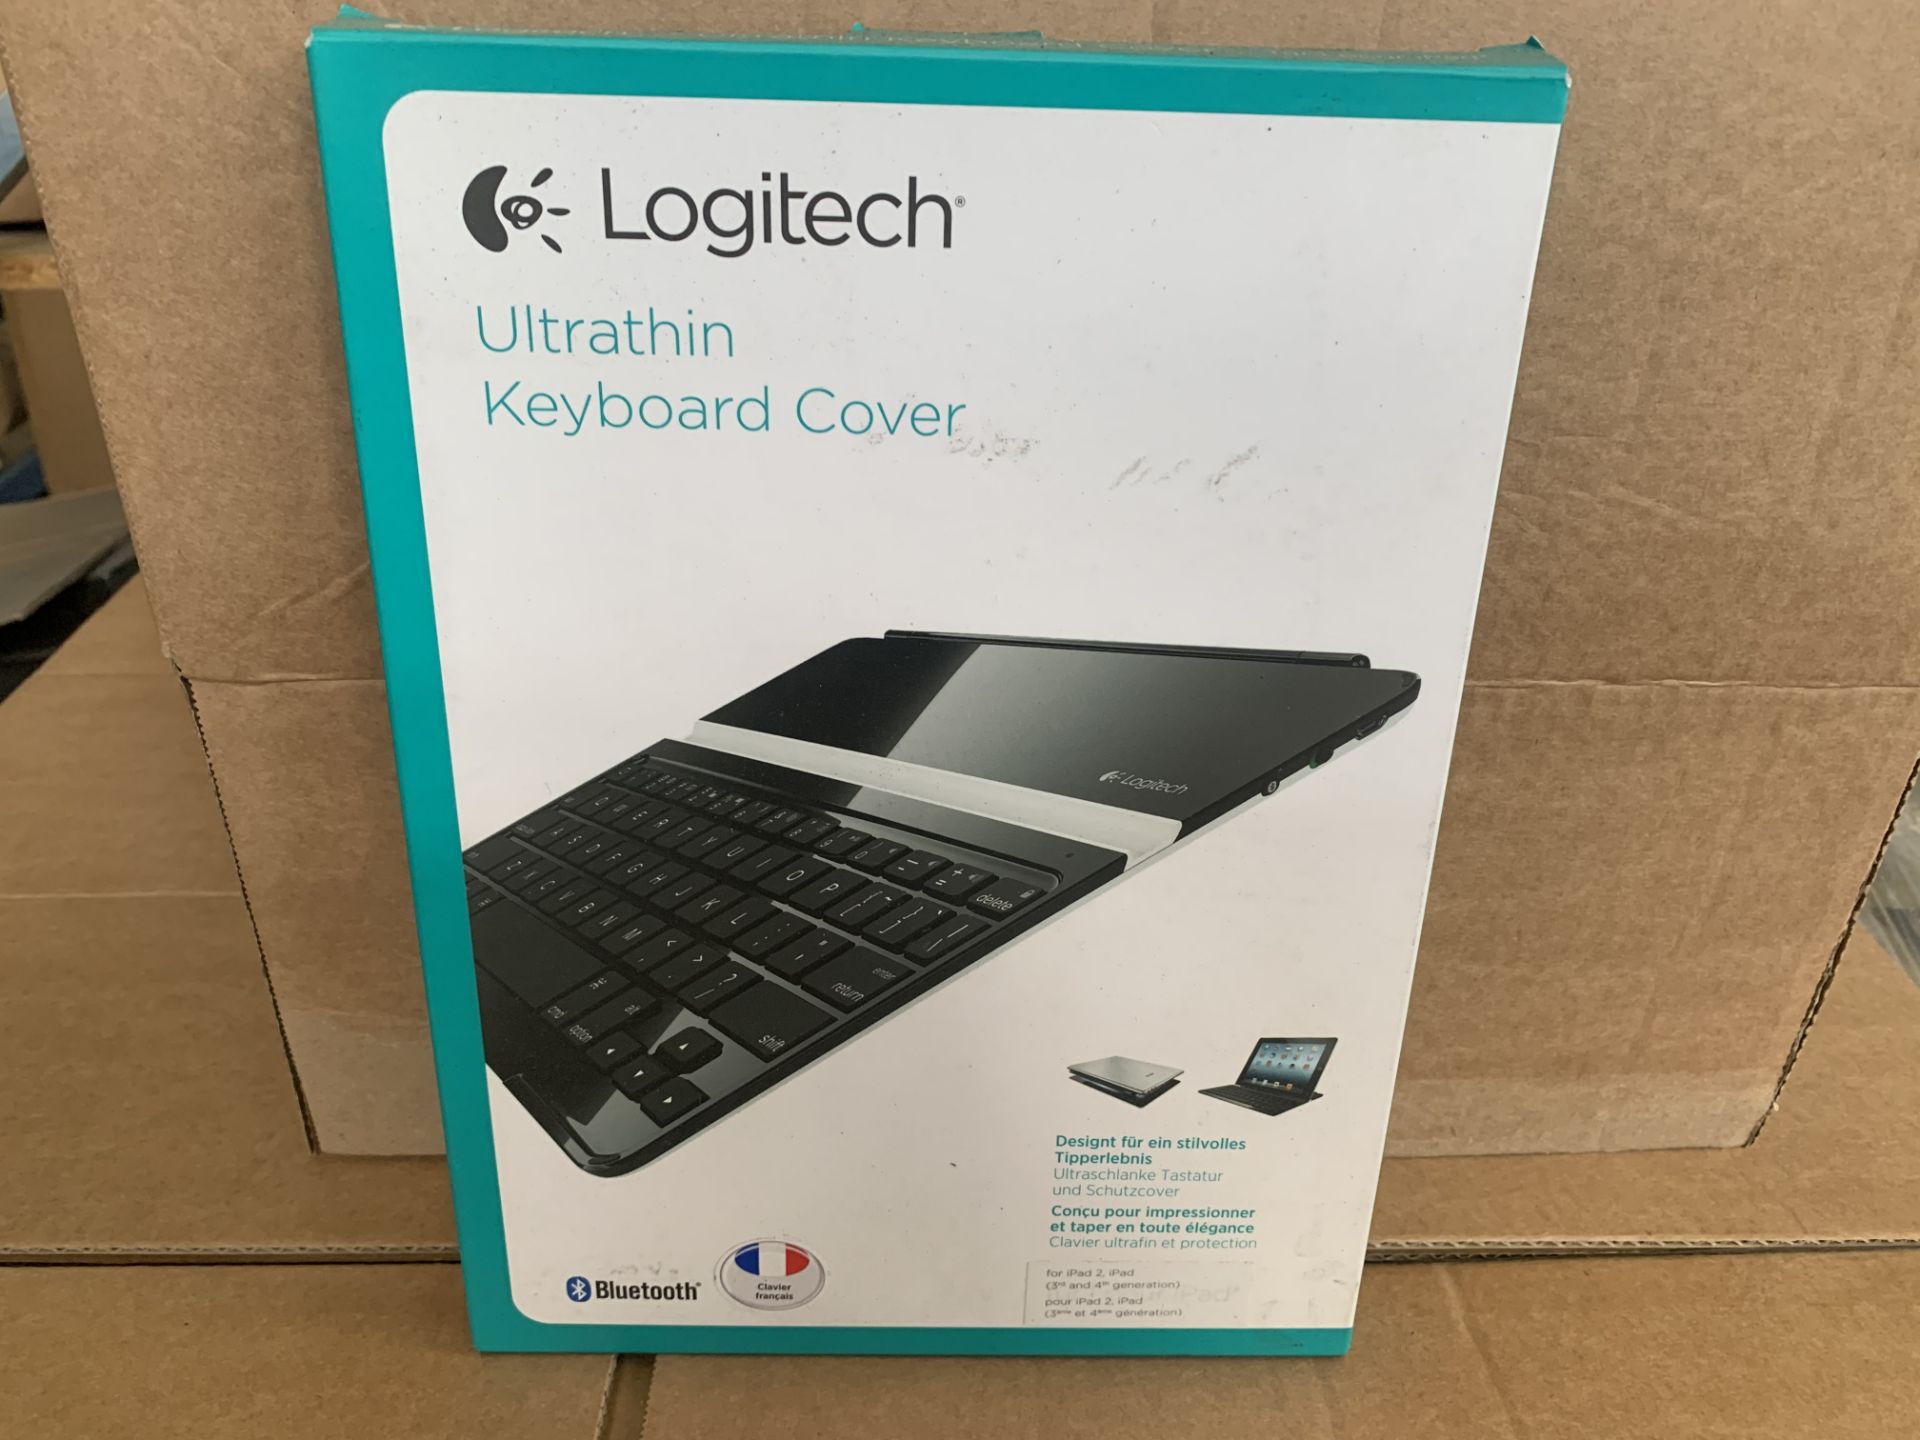 8 X LOGITECH ULTHARIN KEYBOARD COVERS FOR IPAD 2(FRENCH)